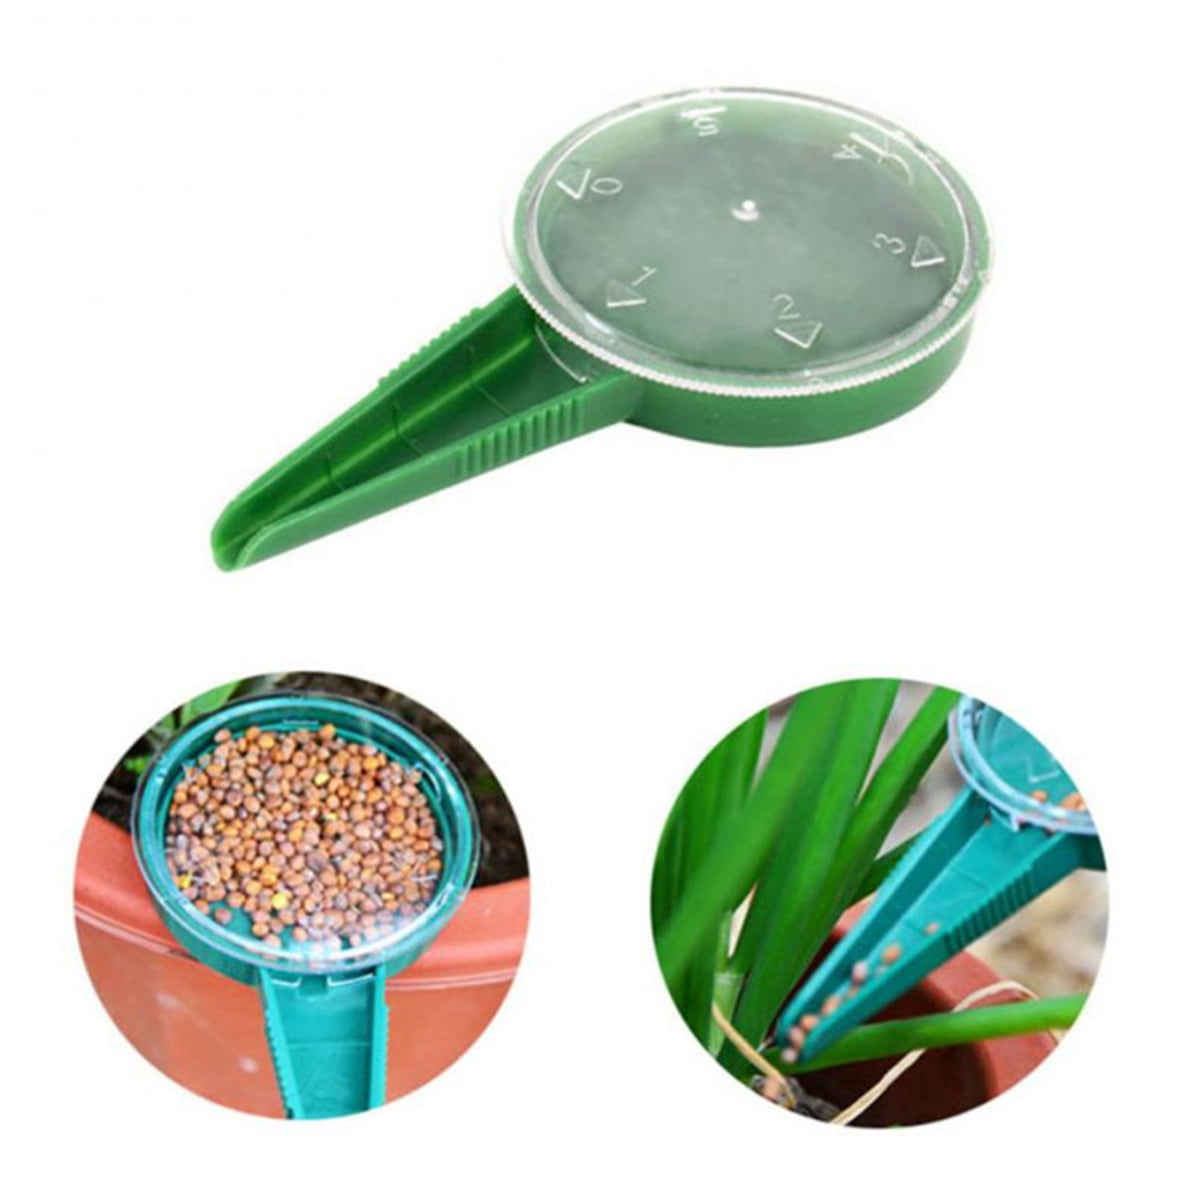 Reinly Gardening Tool Seed Dispenser Plant Flower Seeds Sower Dial Adjustable Portable New